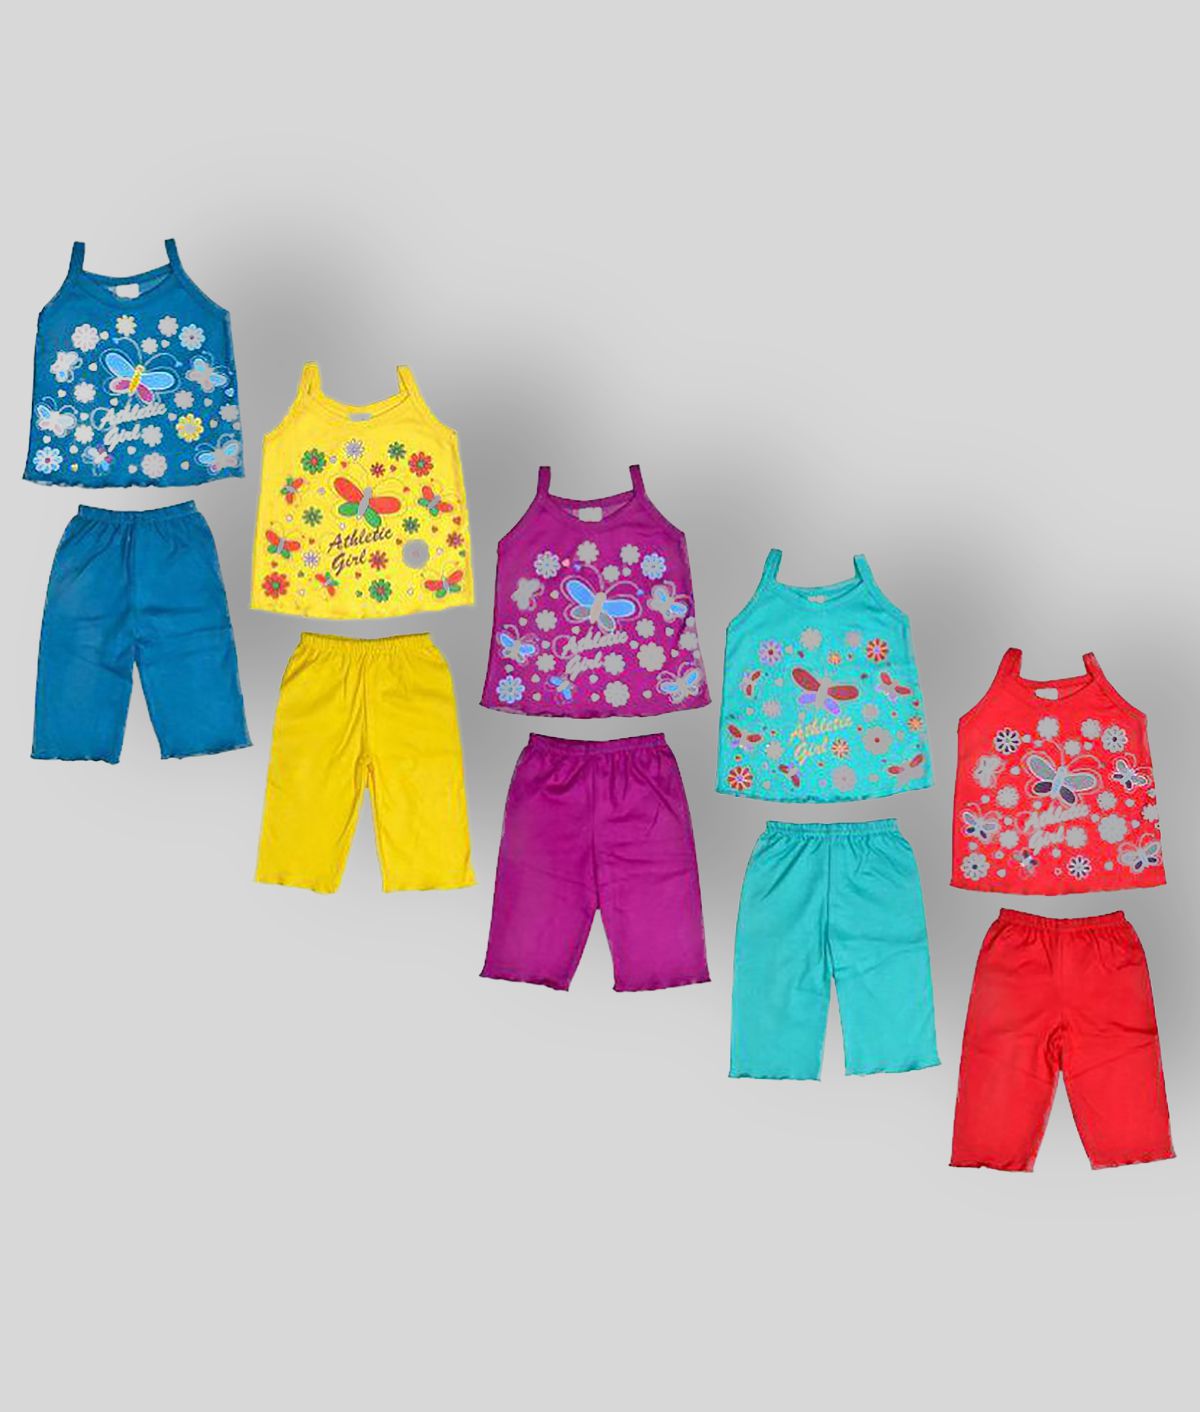     			Sathiyas - Multicolor Cotton Top & Shorts For Baby Girl ( Pack of 5 )